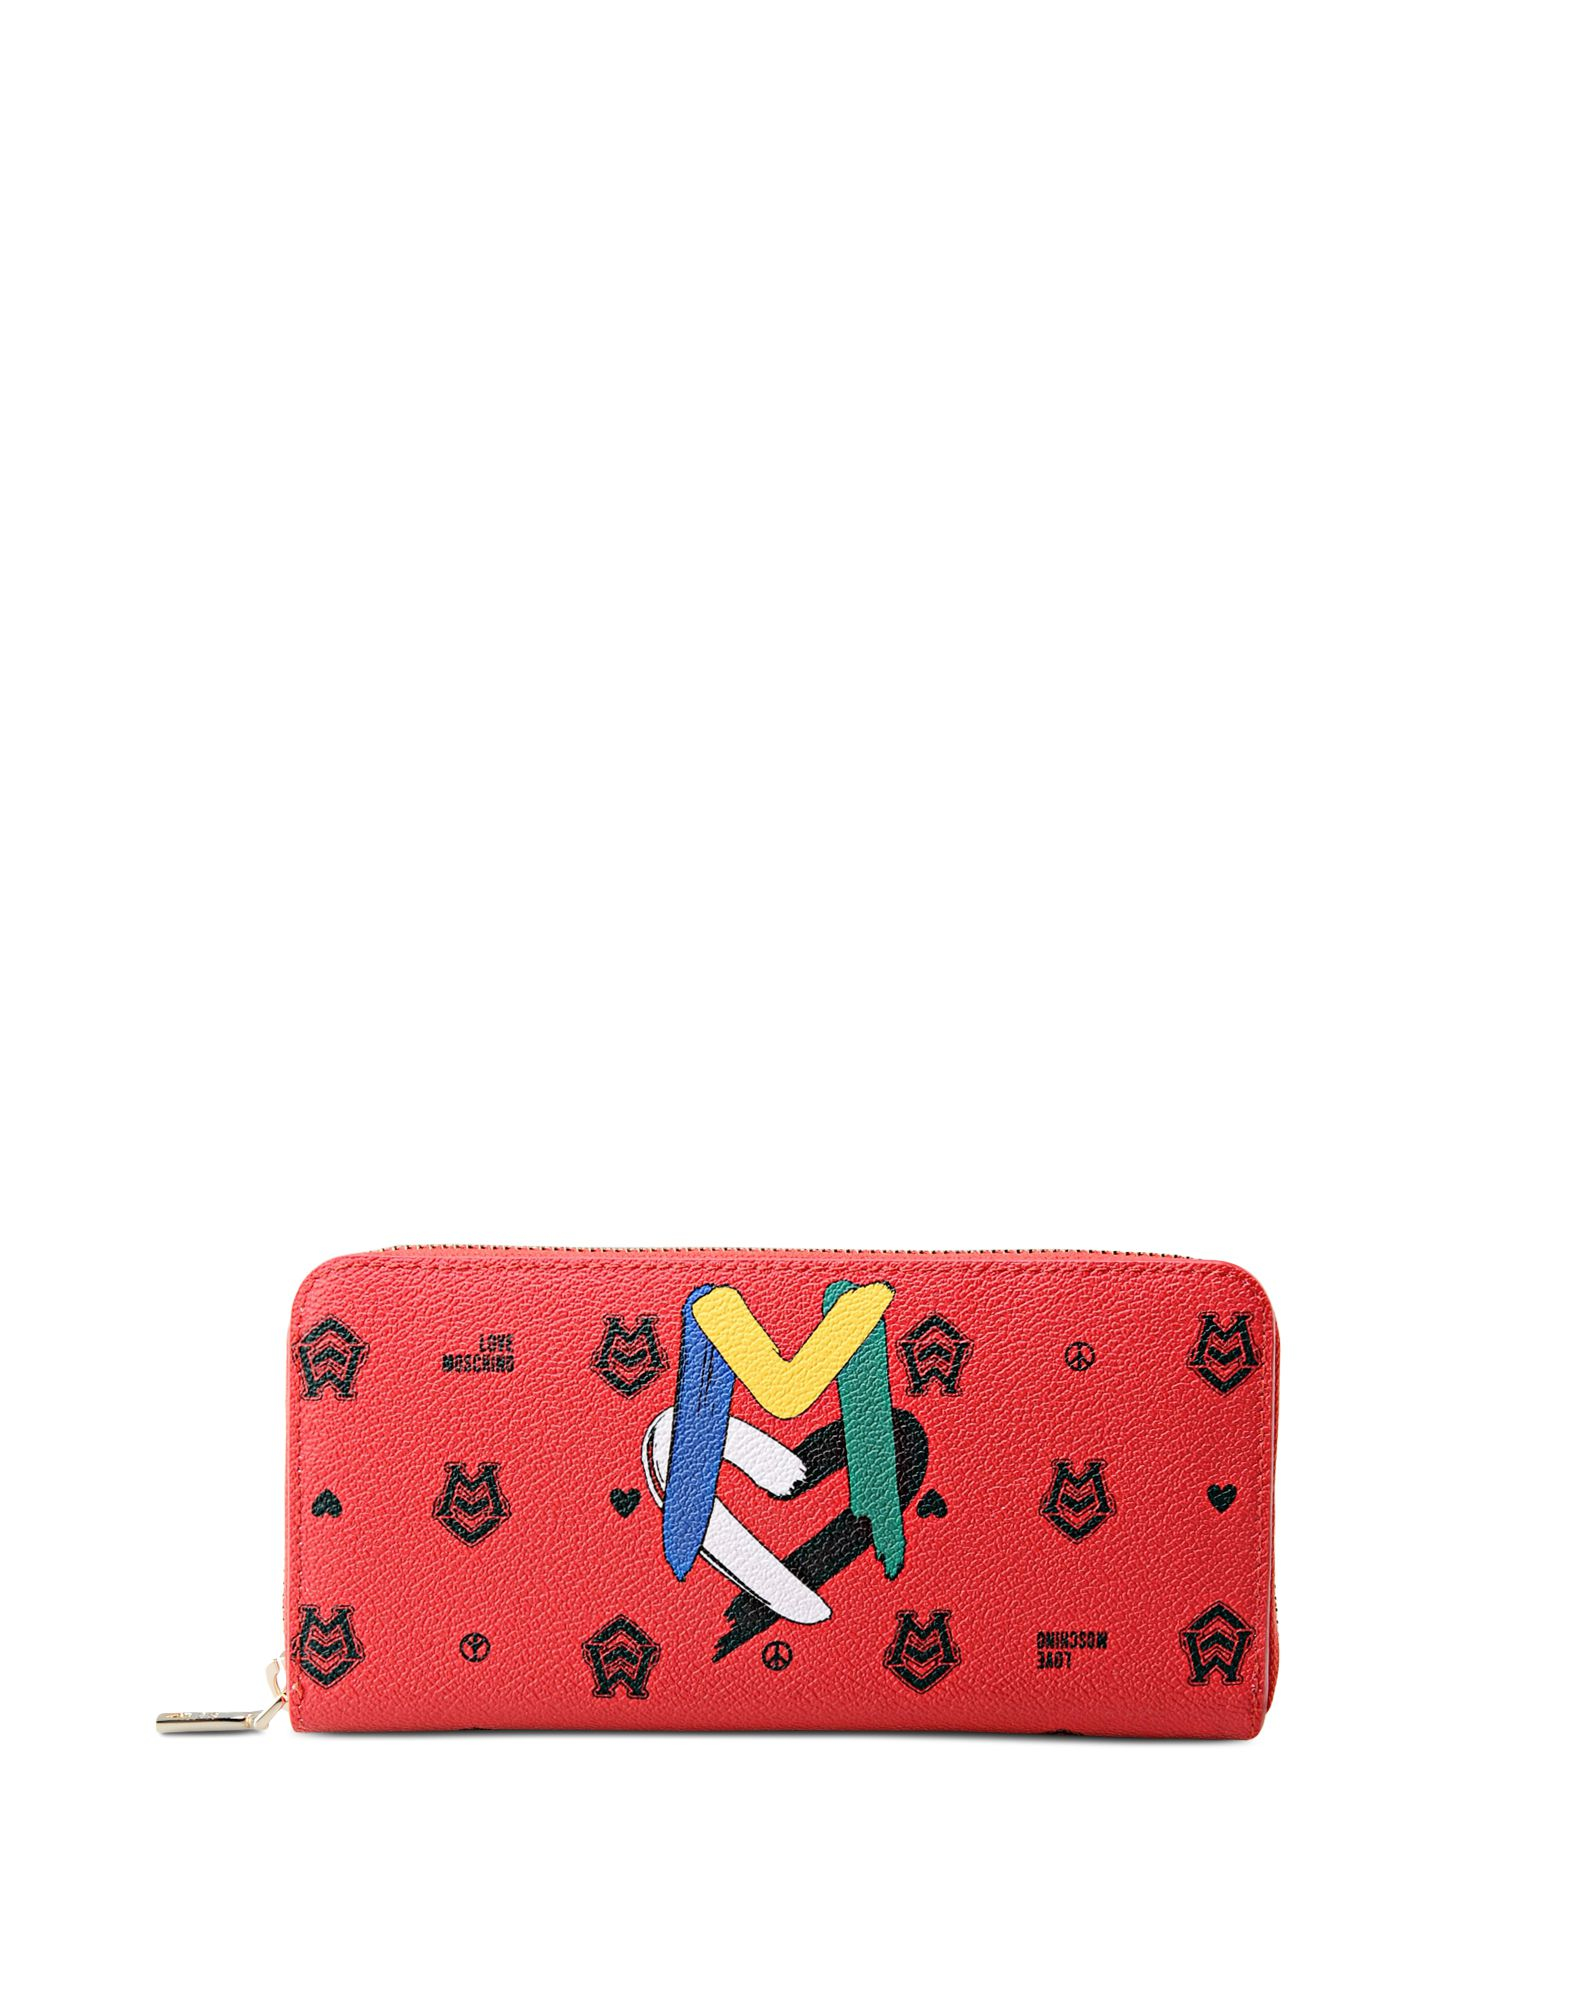 Love moschino Wallet in Red | Lyst